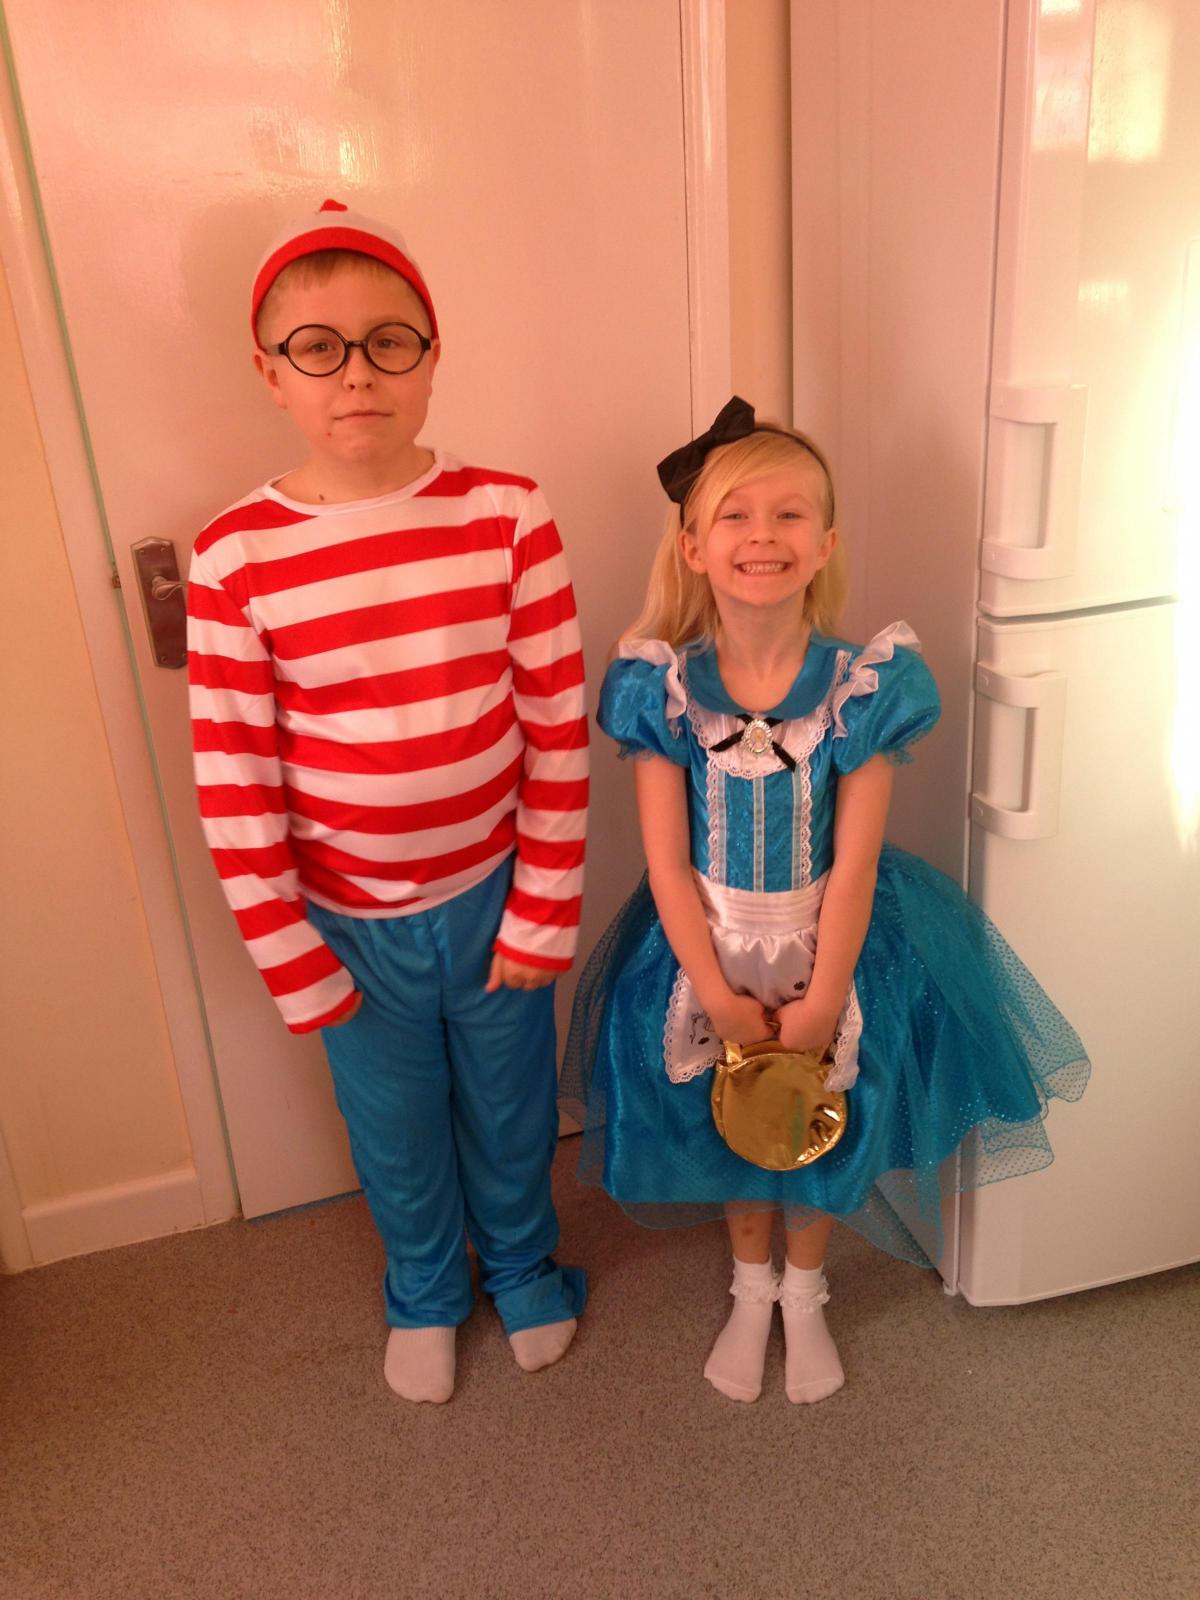 Genevieve Jacobs 6, Westley Jacobs 10 as Alice and Wally